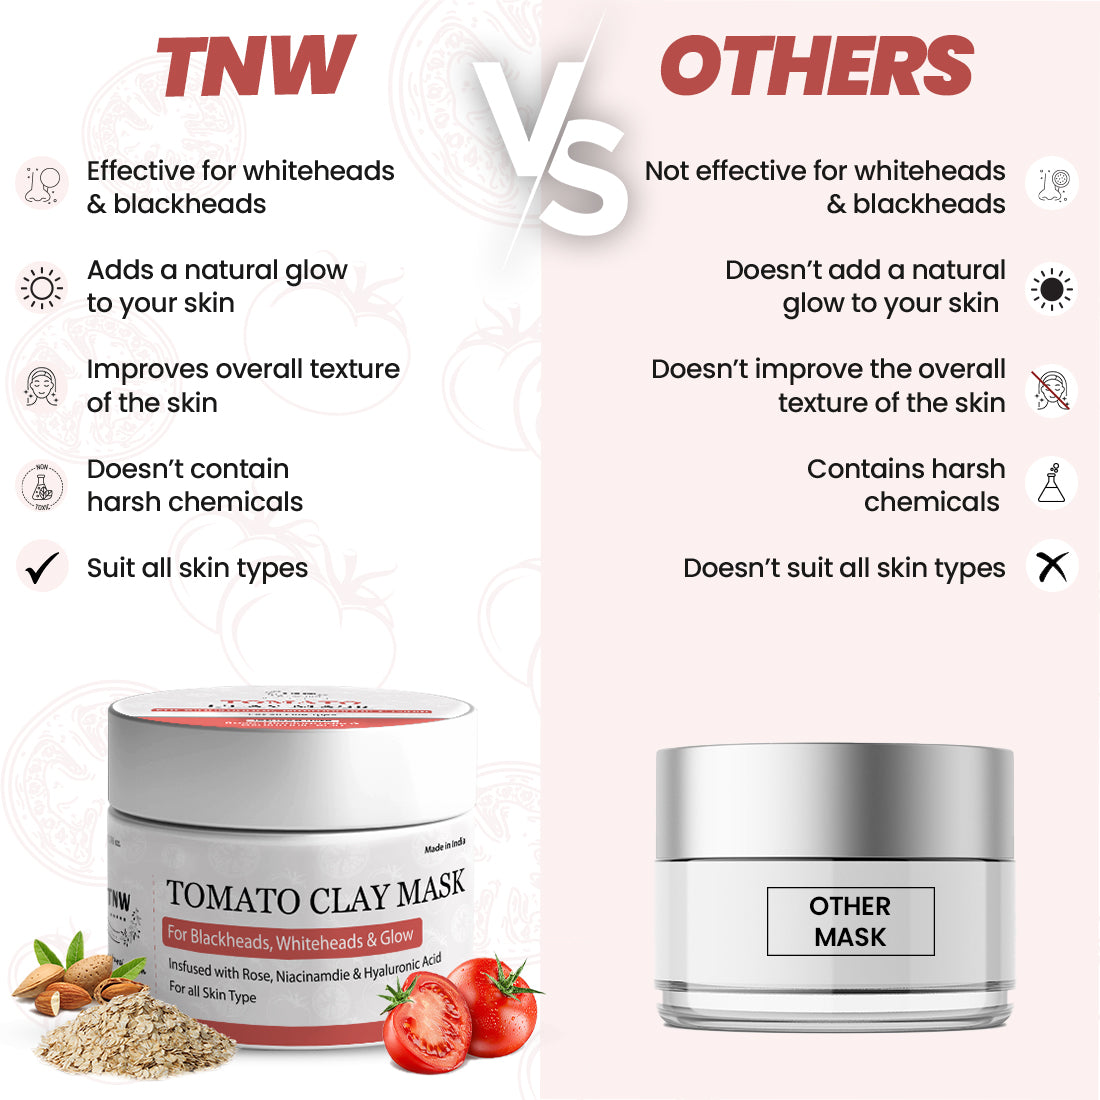 TNW Tomato Clay Mask Vs Others